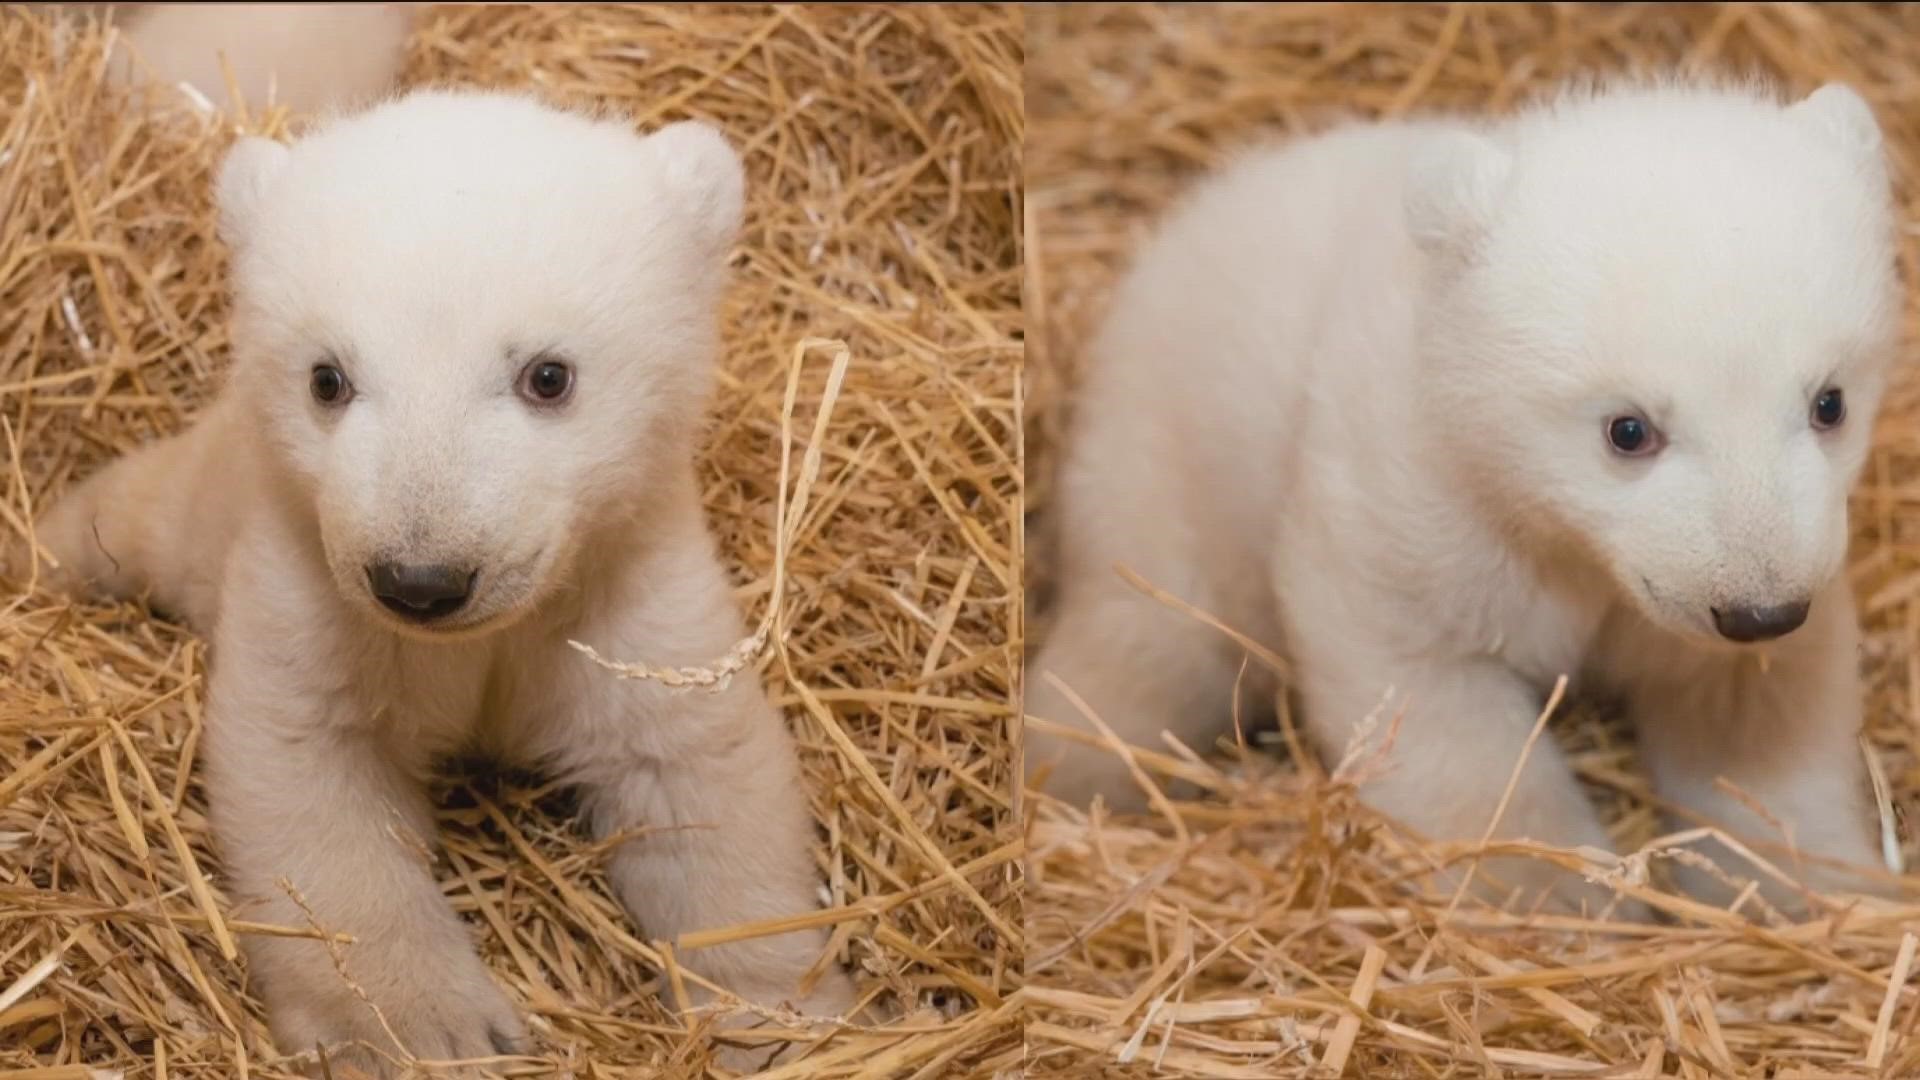 Nearly 3,000 people tried to guess the gender of the Toledo Zoo's latest adorable additions. Who was right?